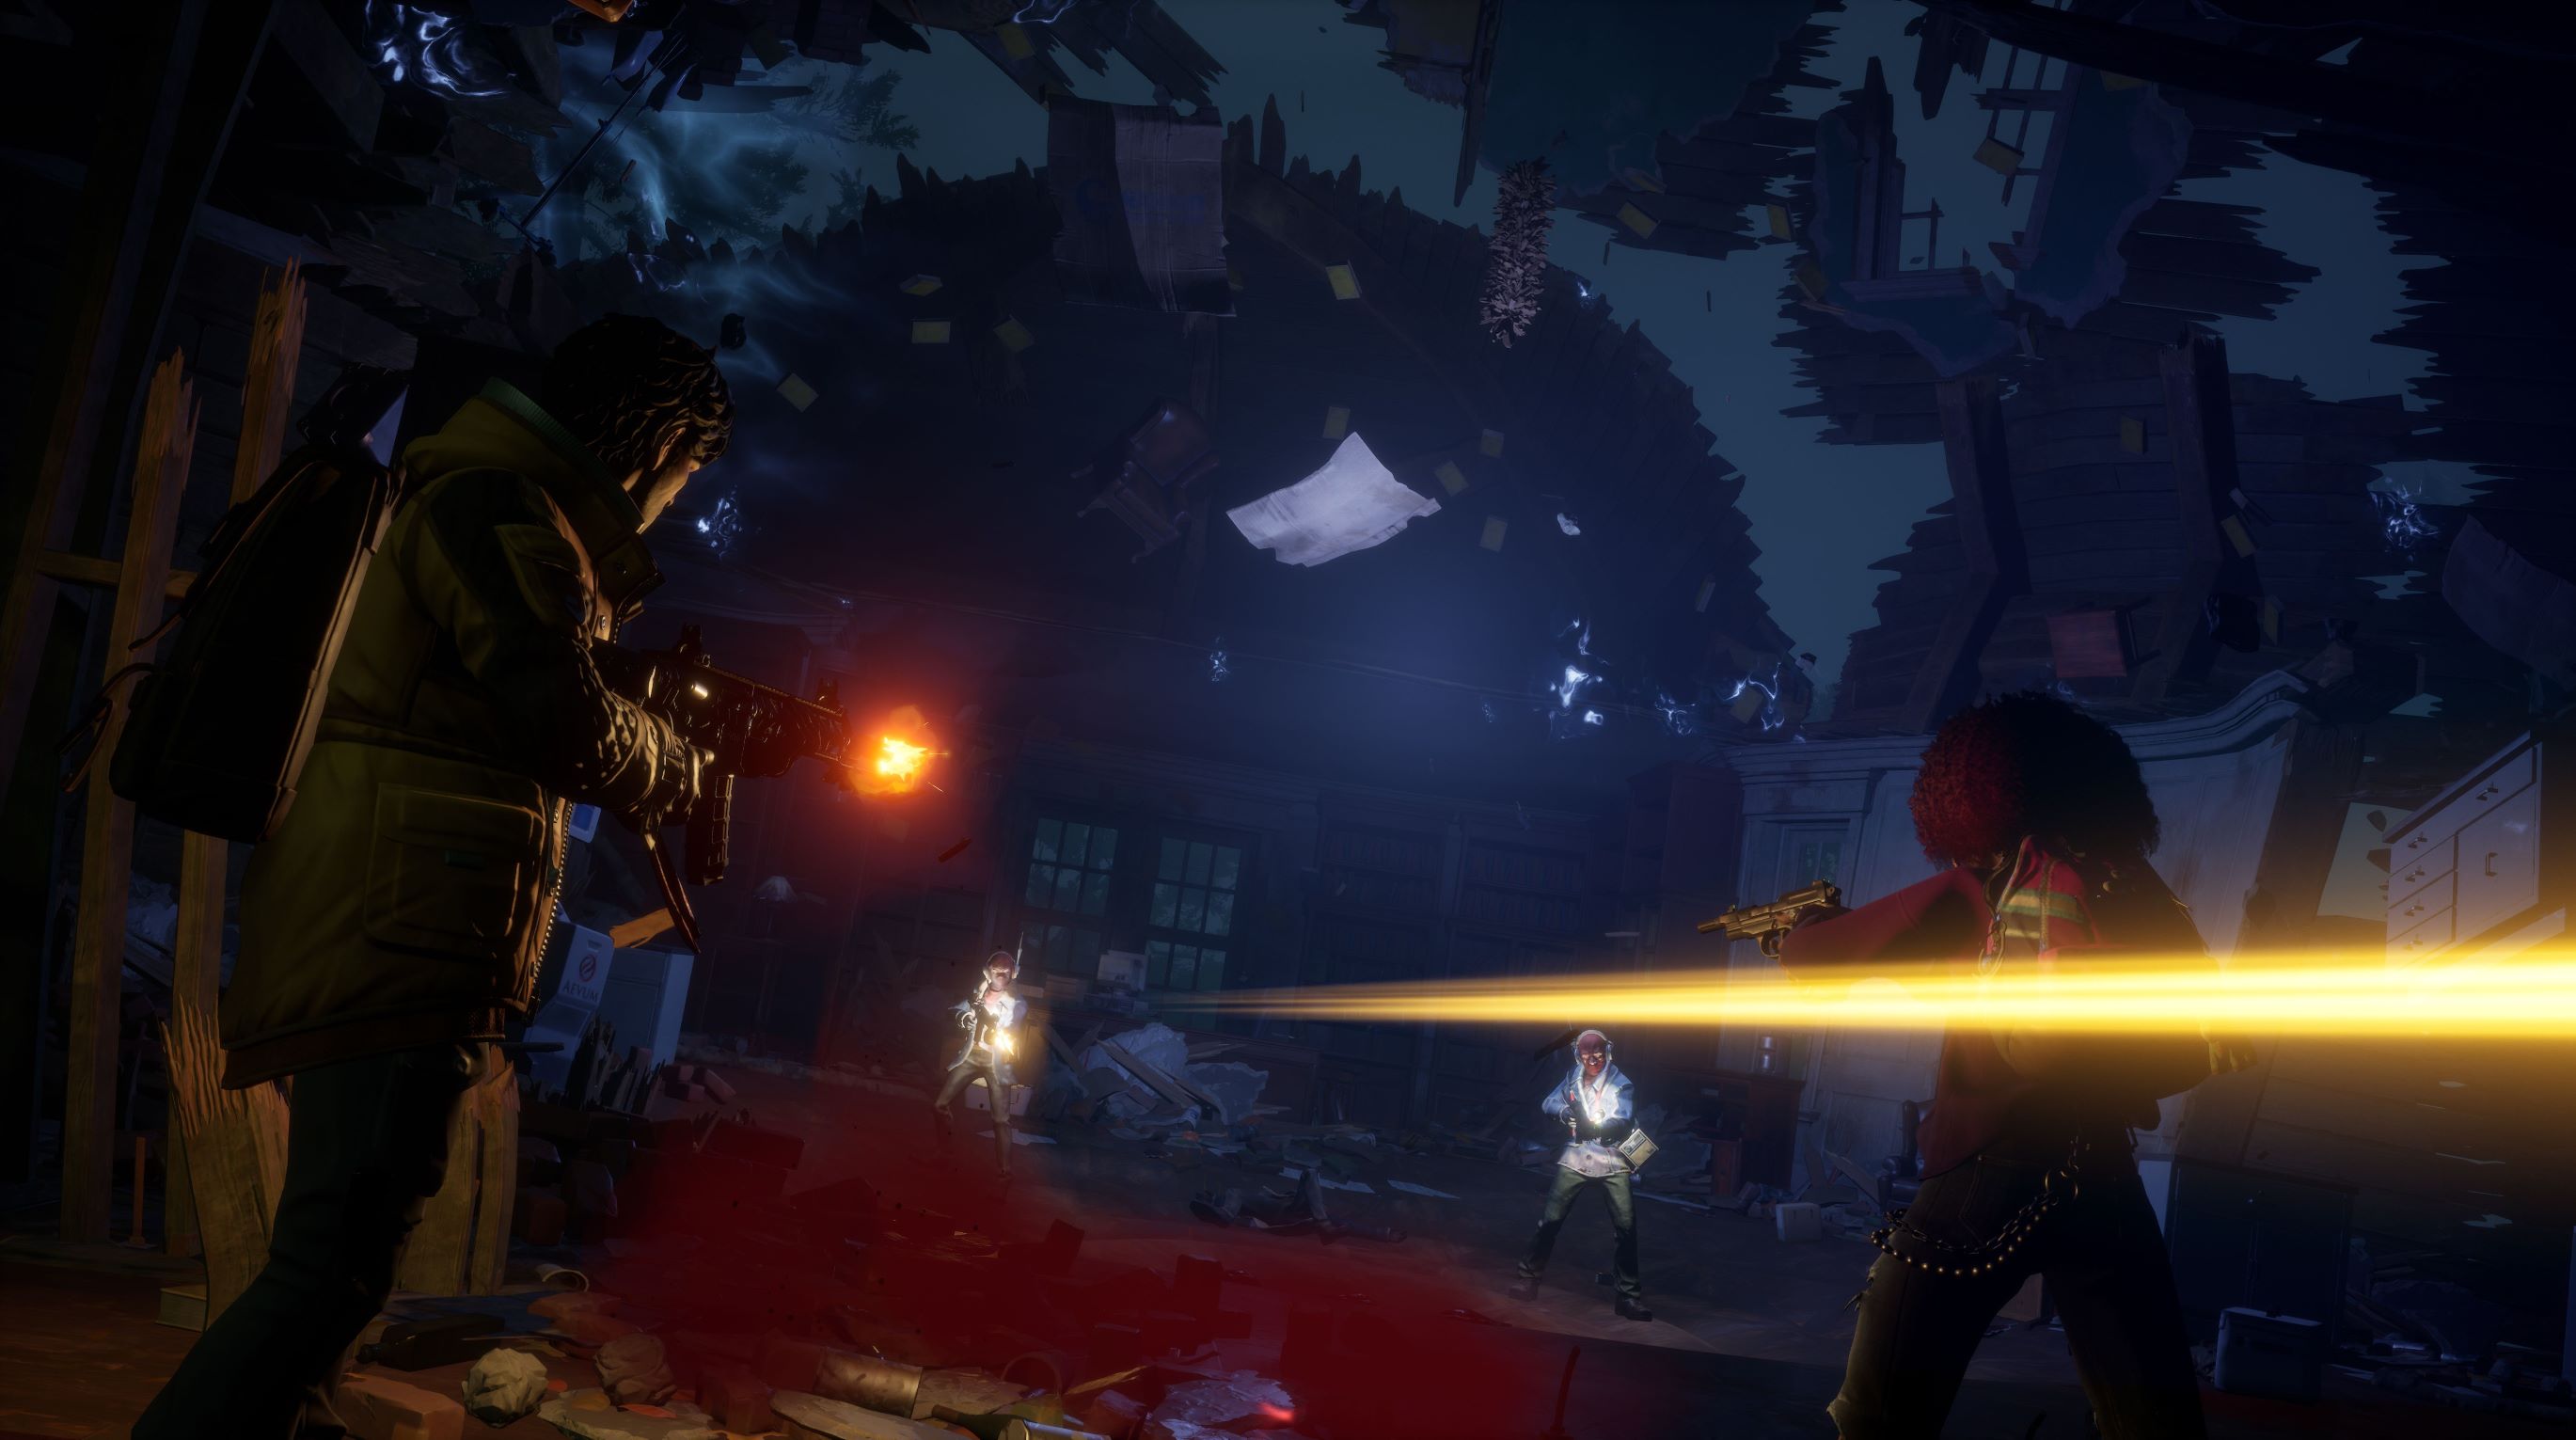 Redfall' Review: A Decent Looter Shooter With an Identity Crisis